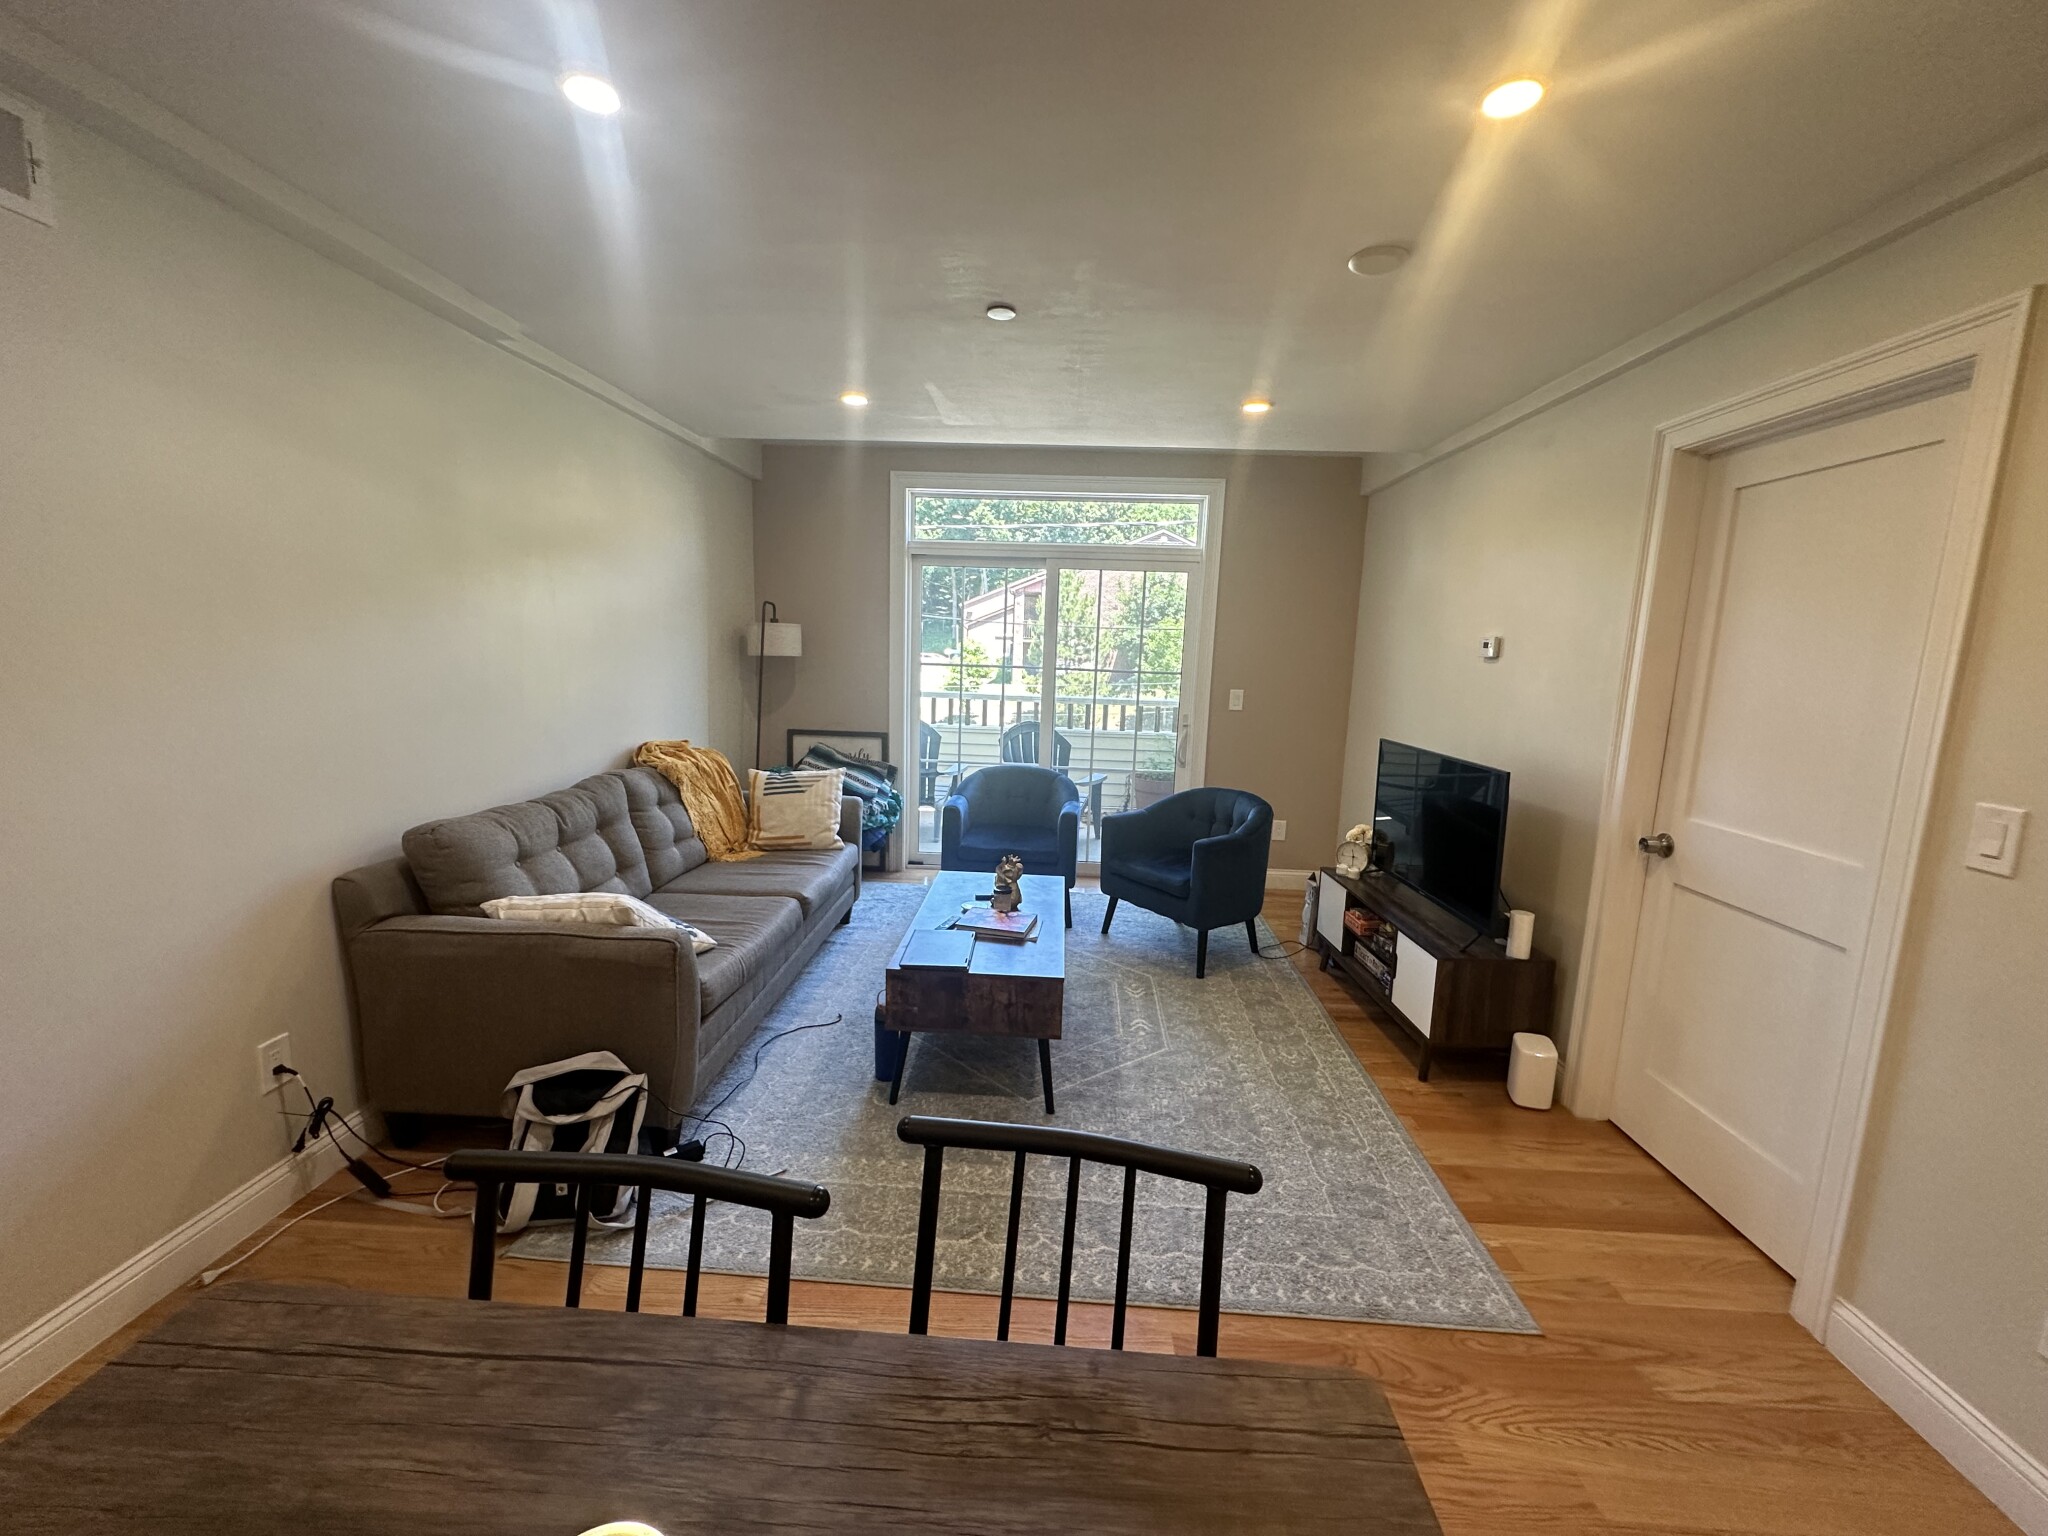 Photos of apartment on Watson Rd.,Belmont MA 02478